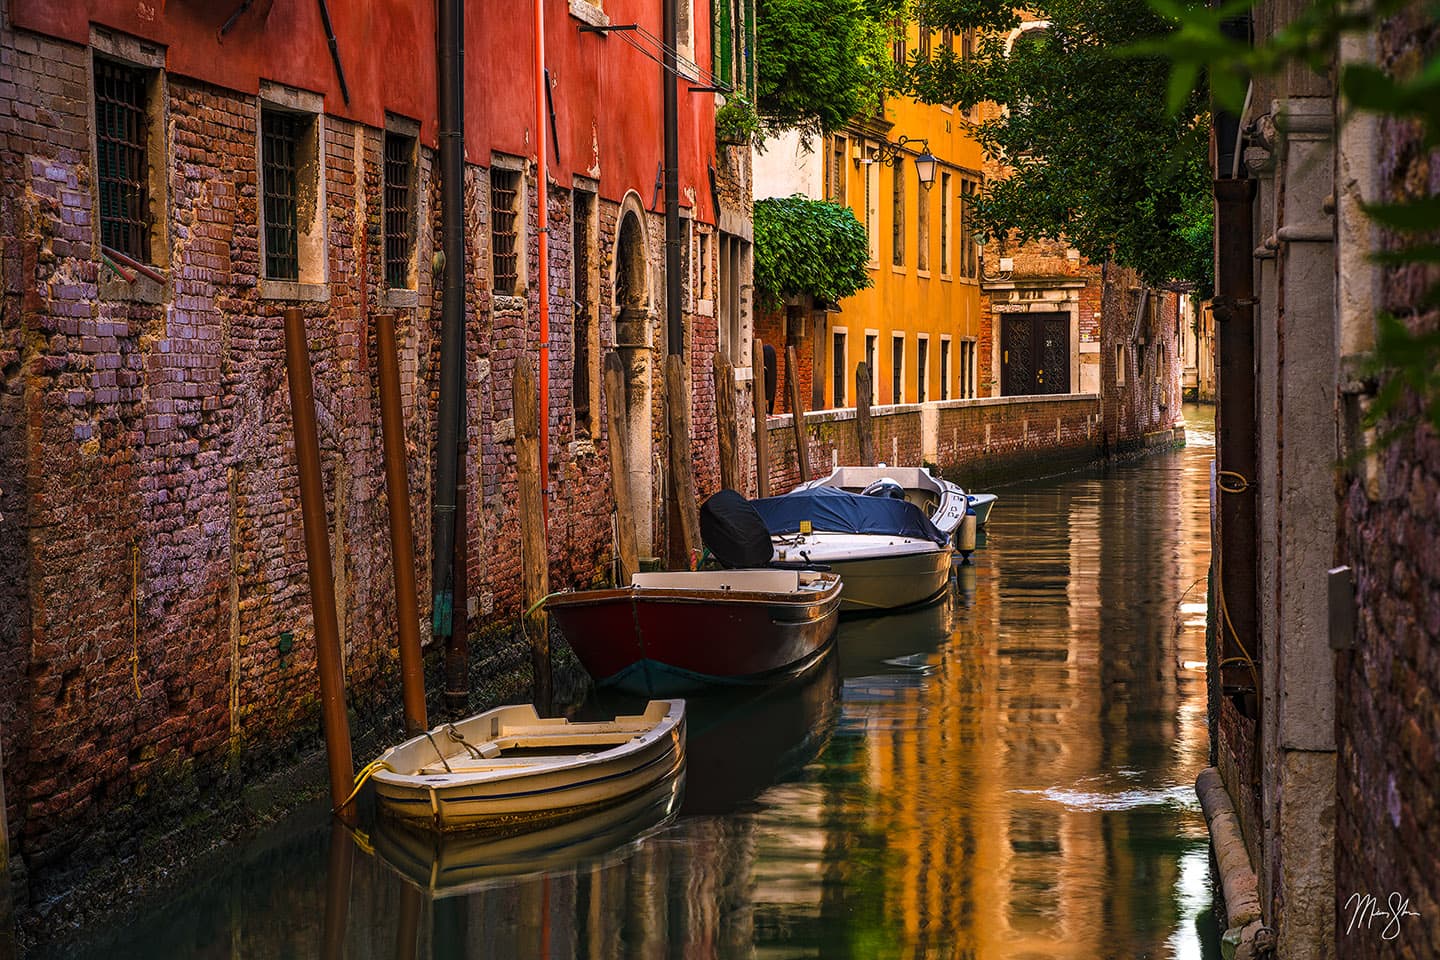 Canals of Venice - Venice, Italy